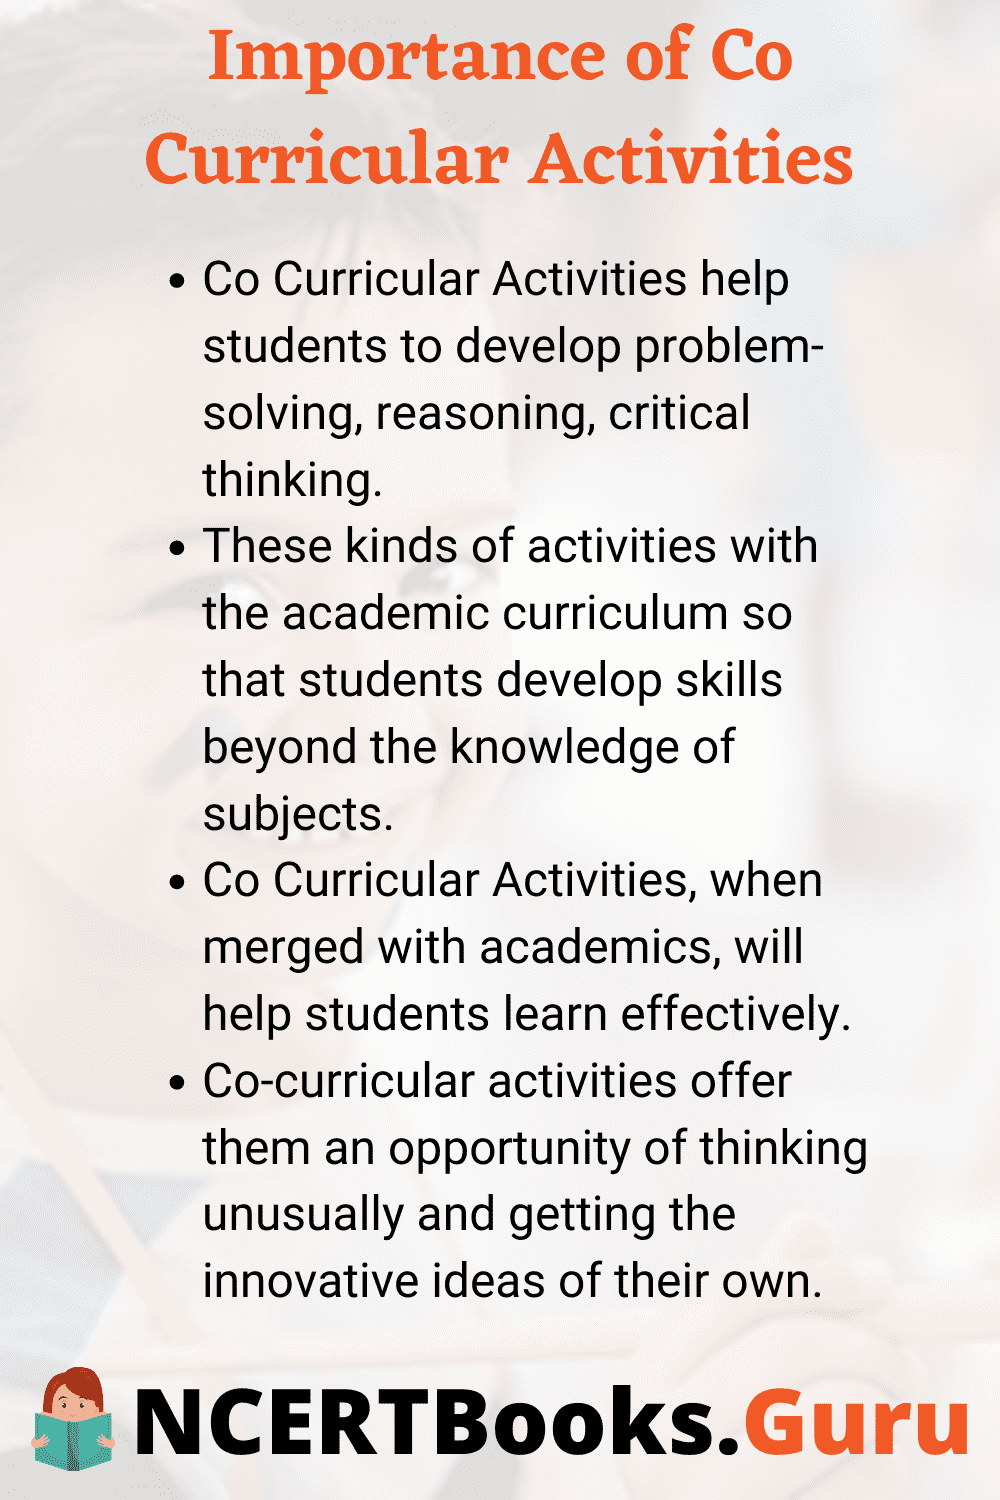 Co-curricular Activities Make Students Active and Creative